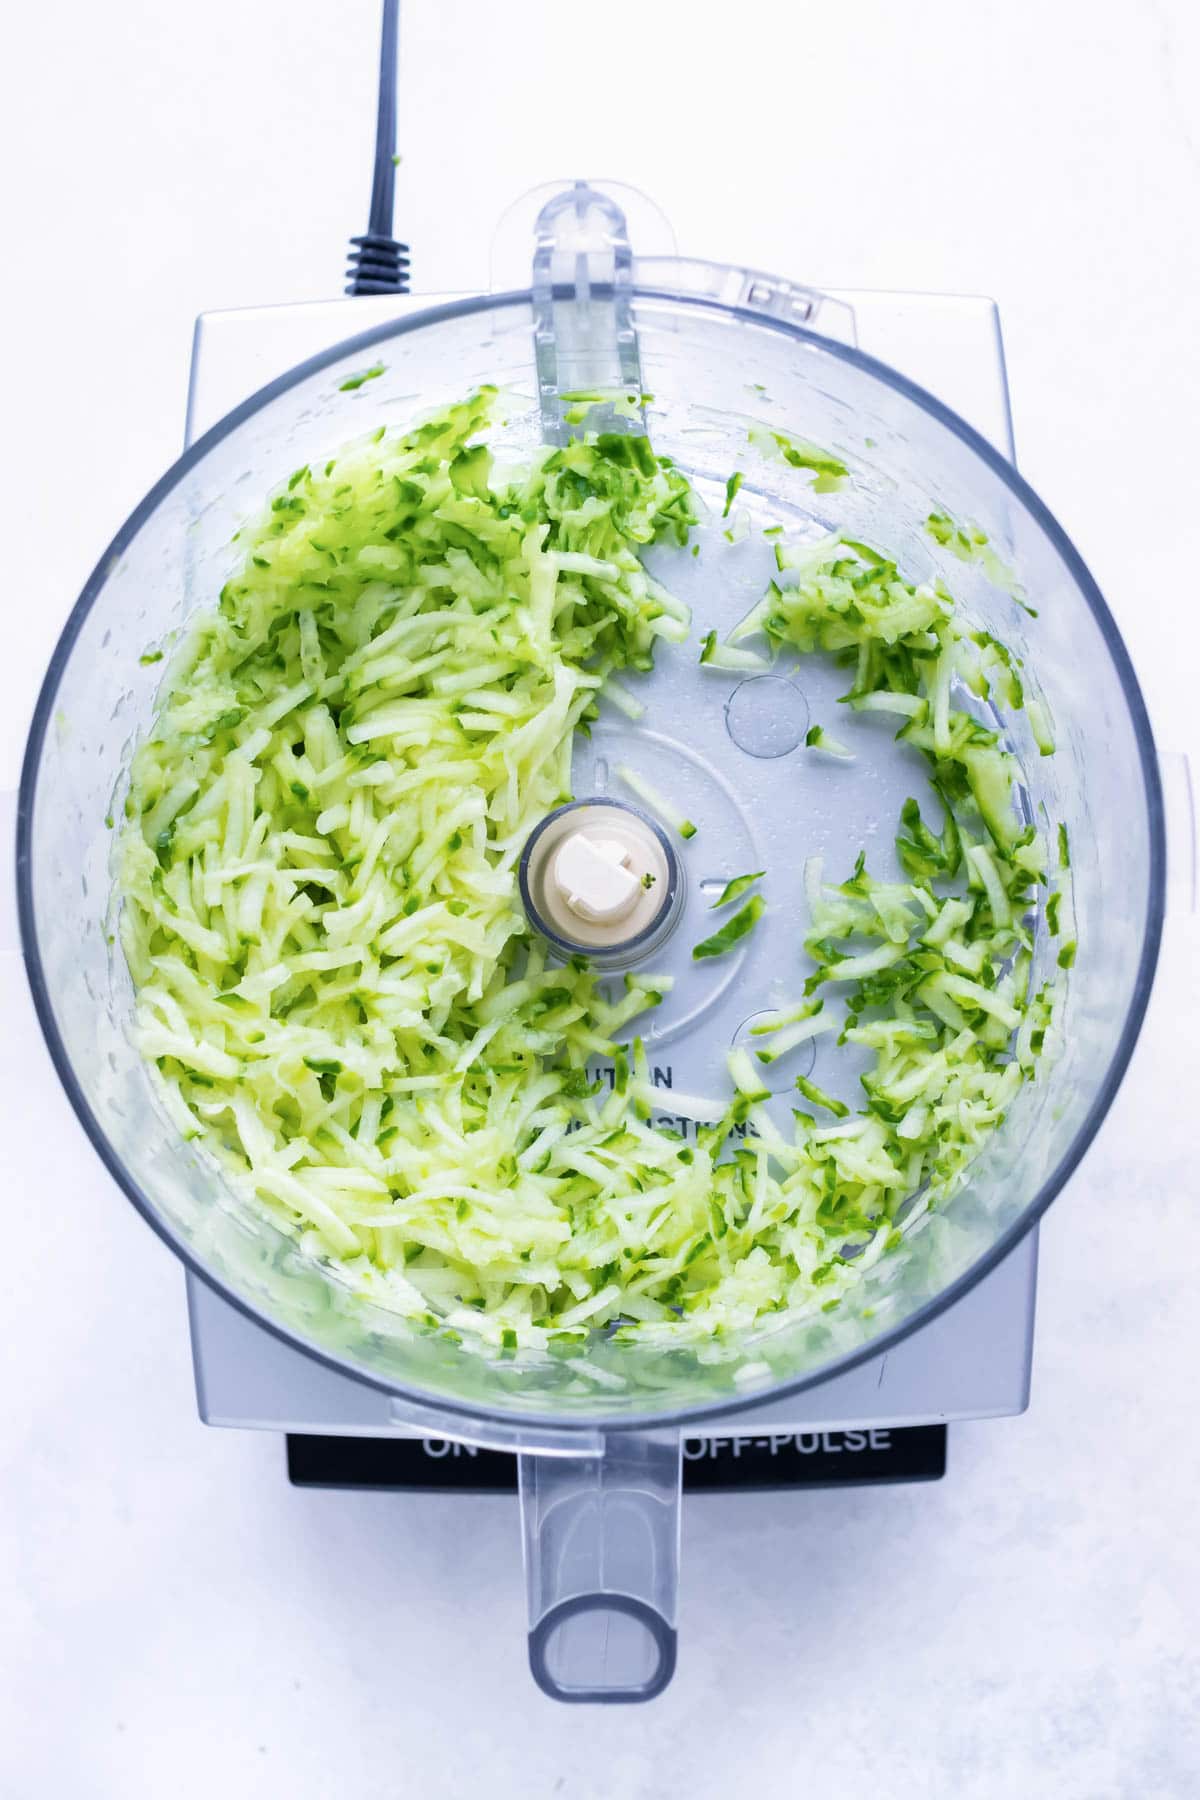 Cucumber is shredded in a large food processor